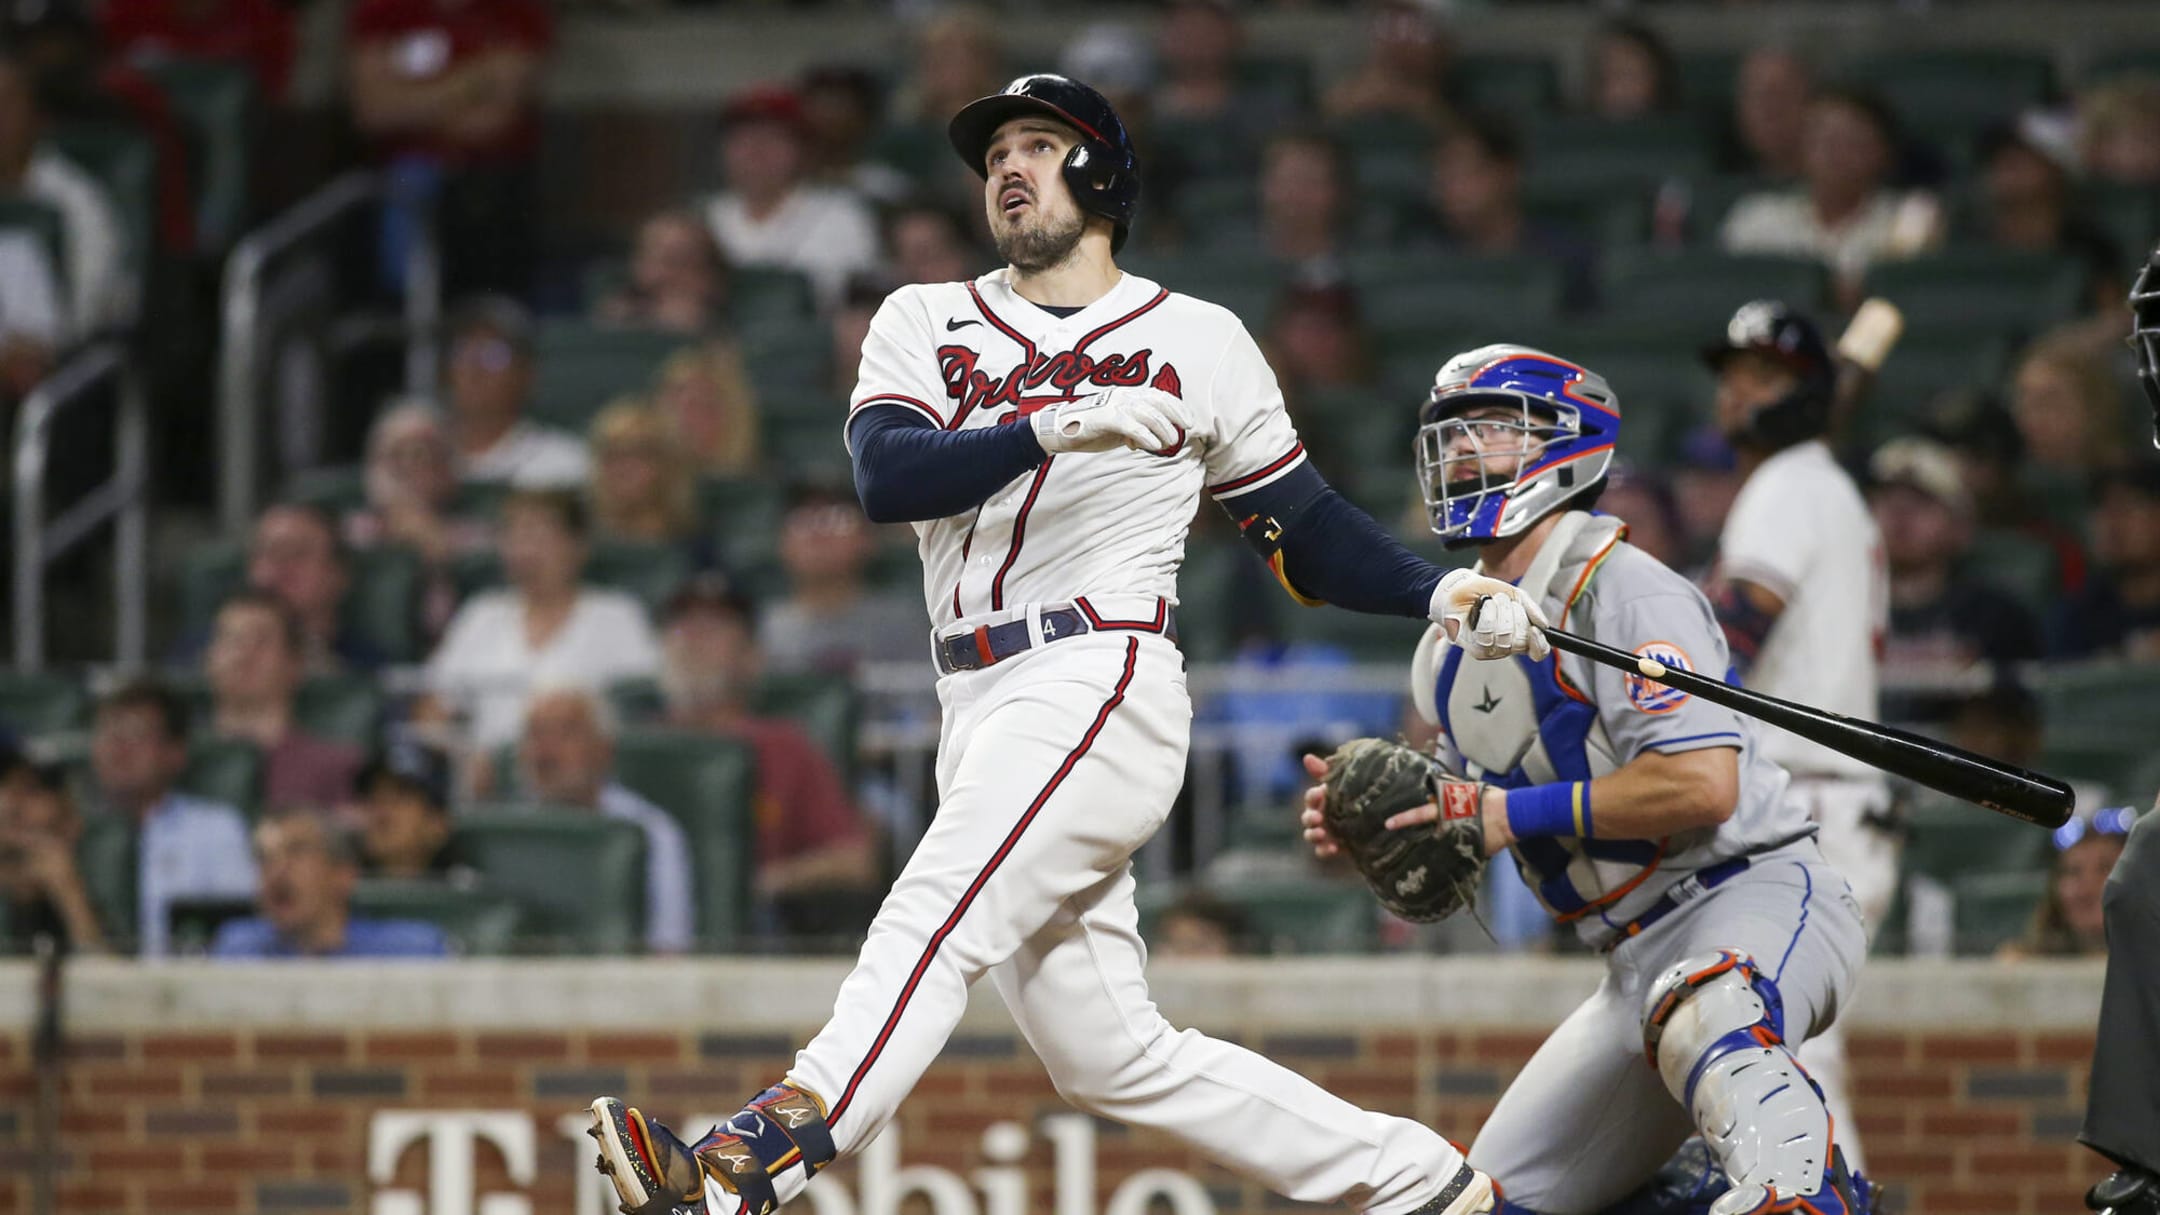 Braves News: Braves bid farewell to Adam Duvall after signing with Boston